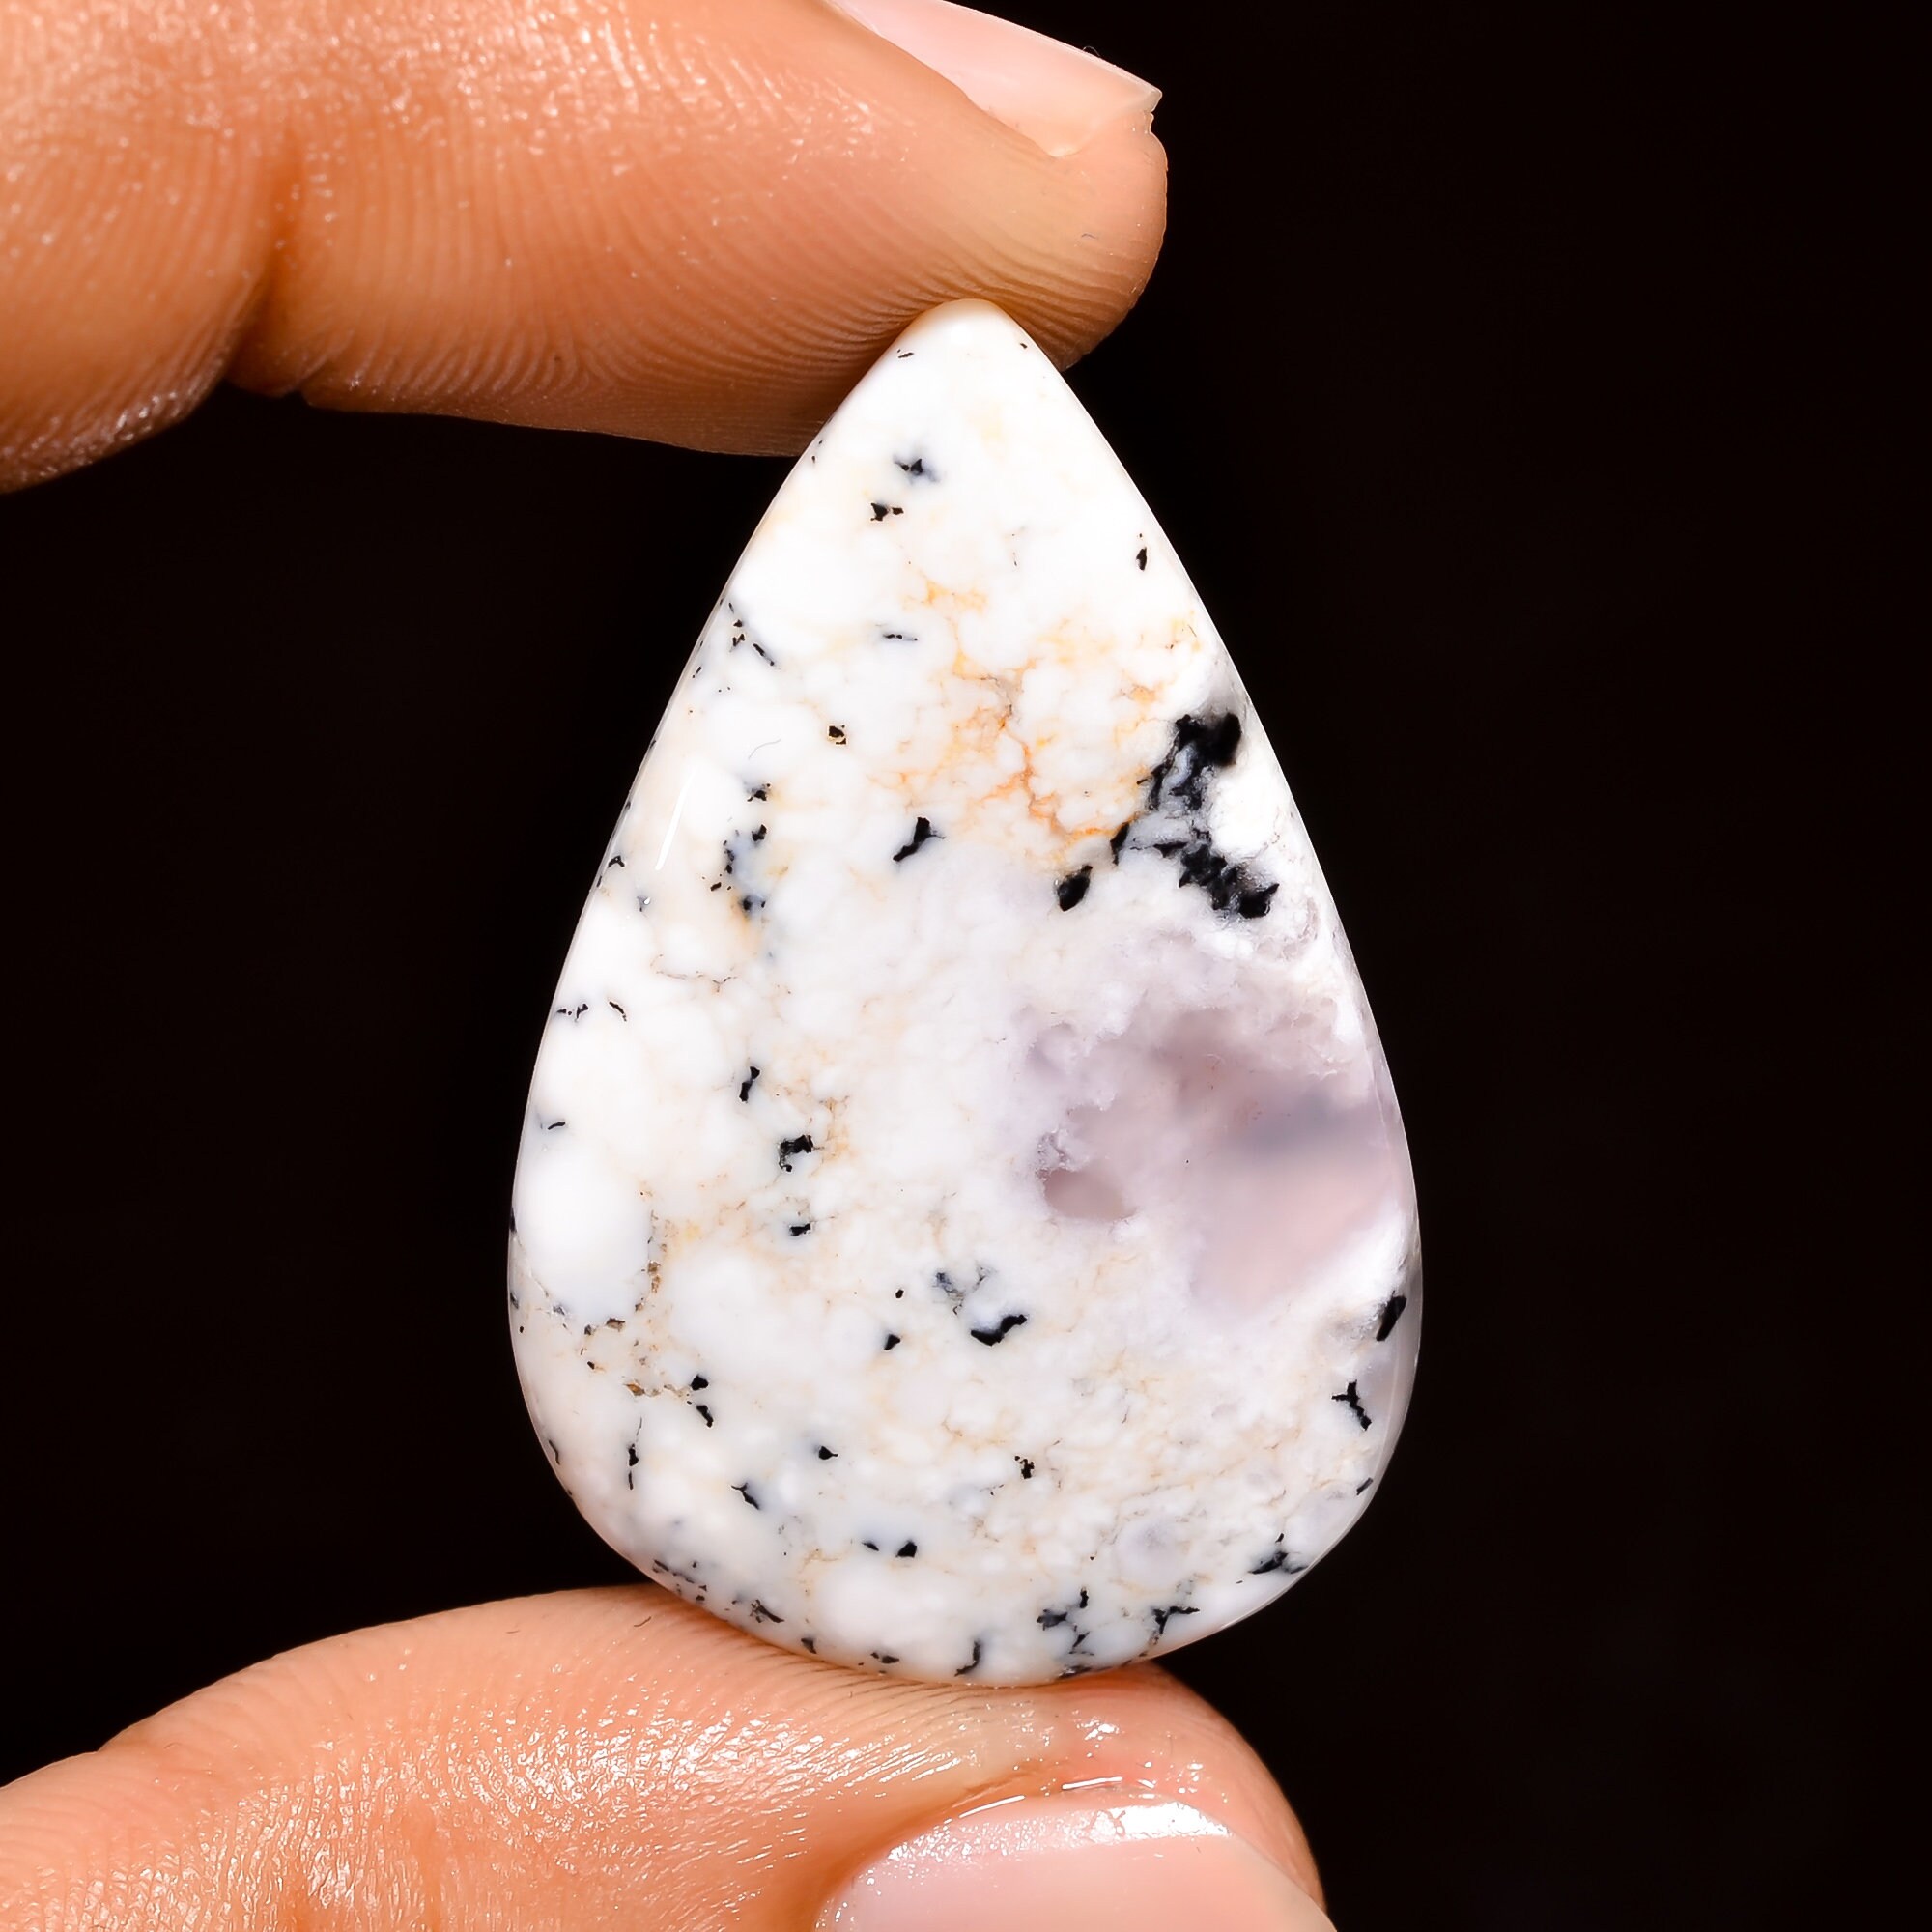 Fantastic Top Grade Quality 100% Natural Yellow Dendrite Opal Pear Shape Cabochon Loose Gemstone For Making Jewelry 37.5 Ct 34X25X6mm SB9588